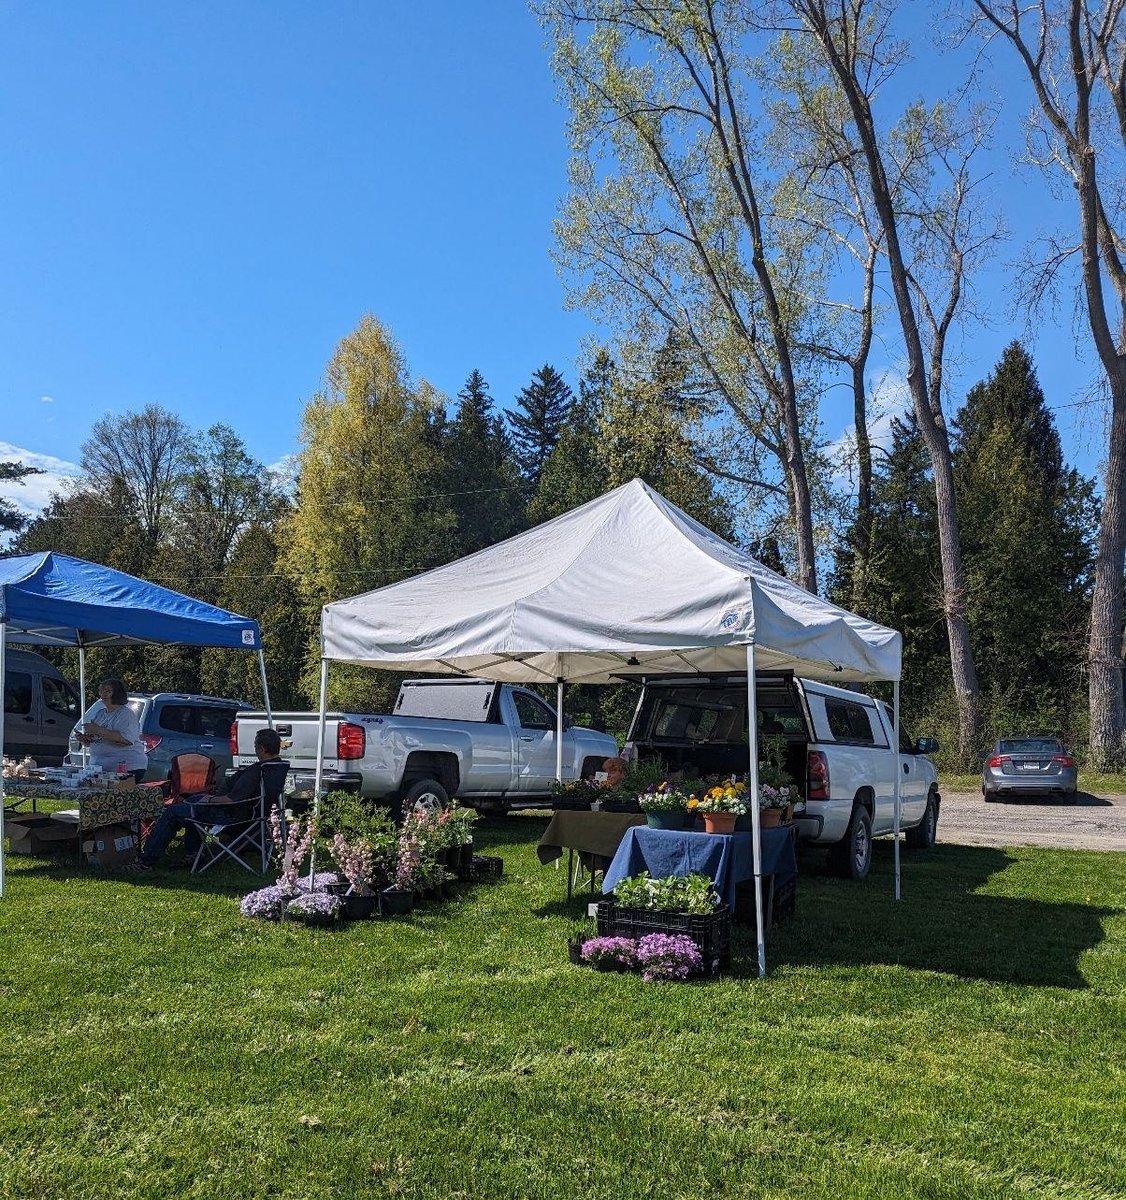 Couldn't make it to the market this weekend? Need a mid-week haul? We've got you covered! Our Wednesday Market at East Hill (next to Walgreens) is running from 3-6 p.m. every Wednesday through October and is great for quick weekday shopping!

#IthacaNY #FingerLakes #farmersmarket